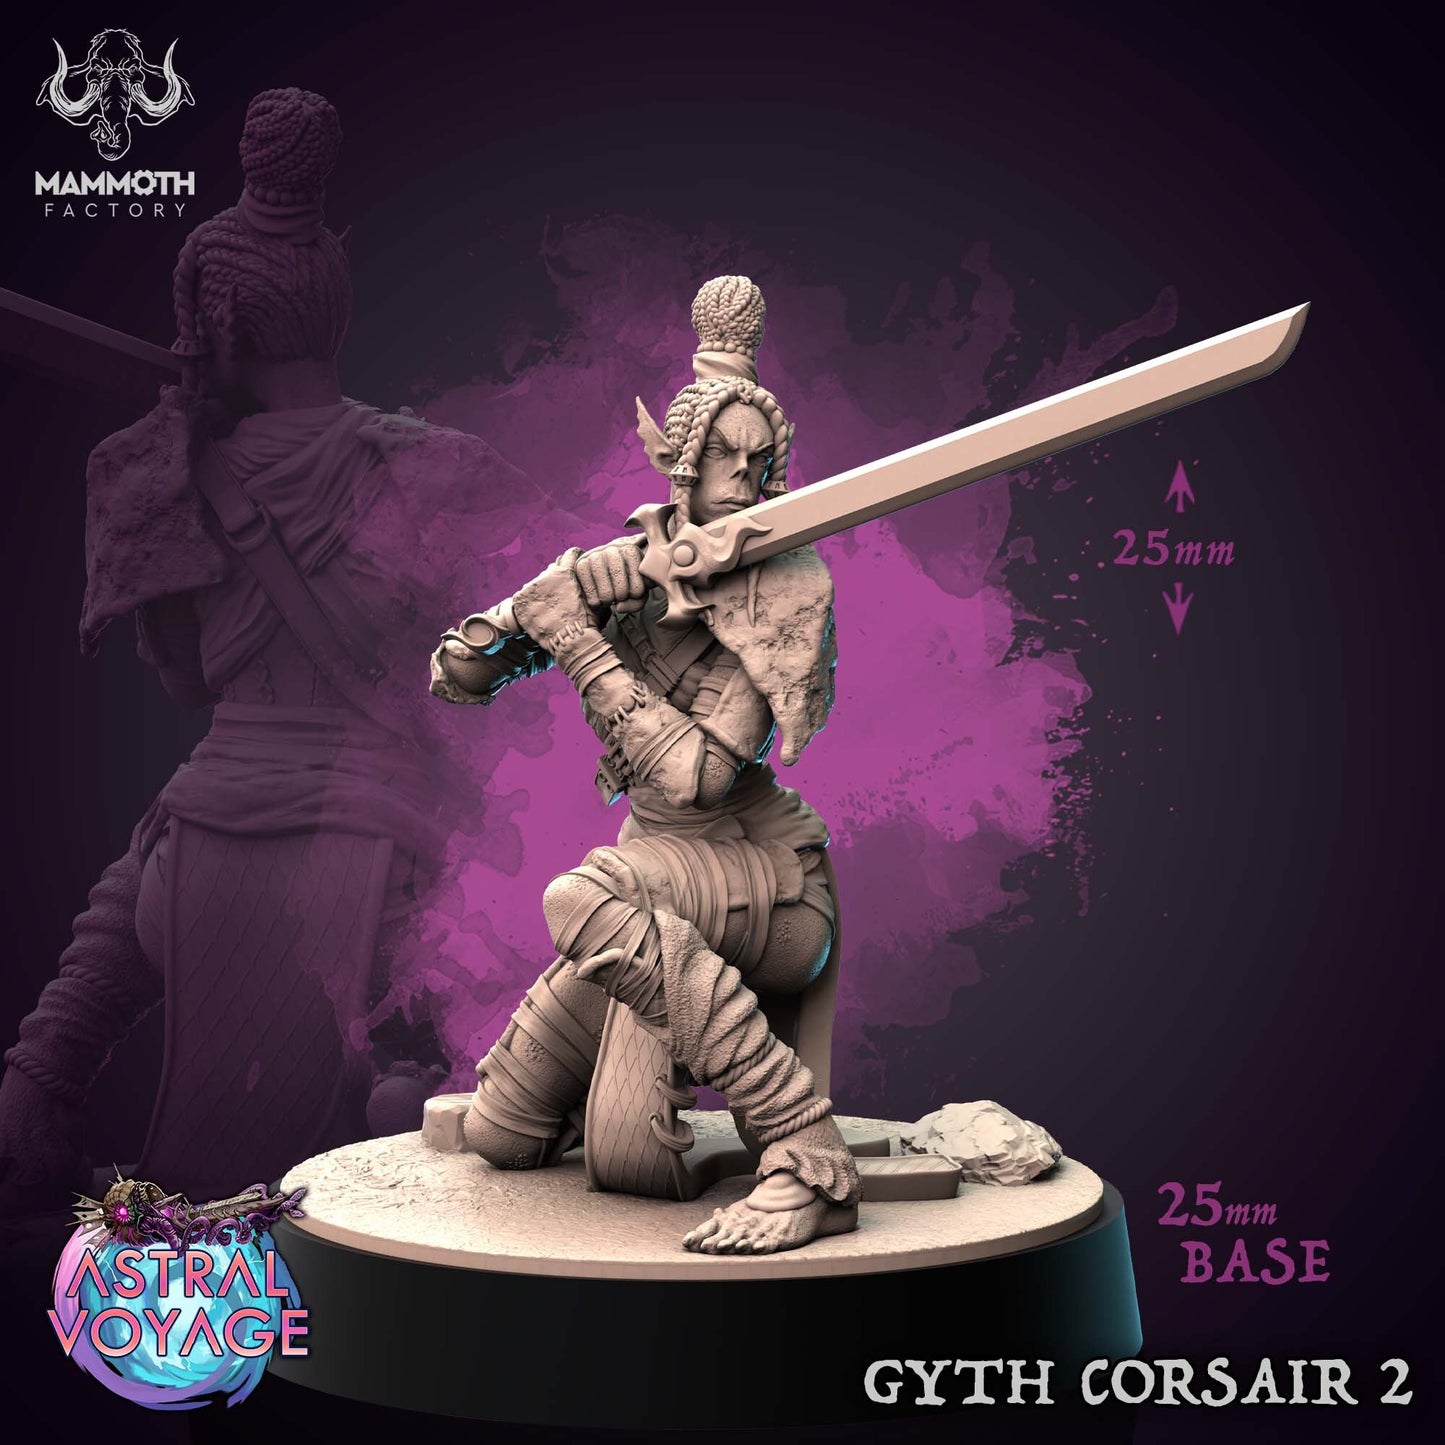 Gyth Corsairs | Mammoth Factory | 3D Printed Resin Miniature | Dungeons and Dragons | Pathfinder | Tabletop Role Playing | D&D